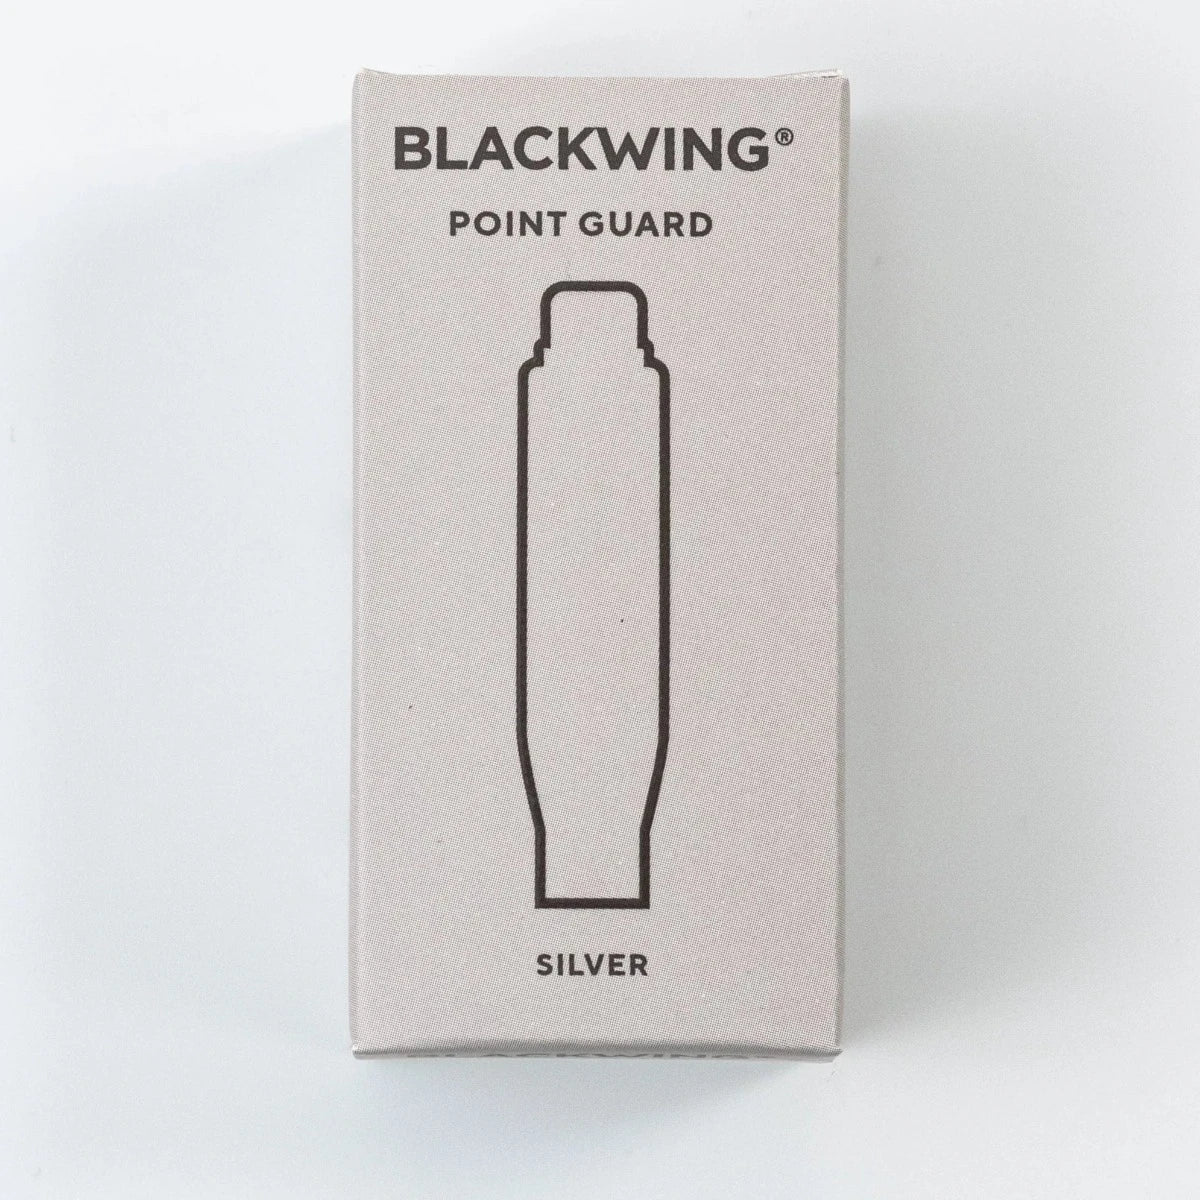 Blackwing Point Guard